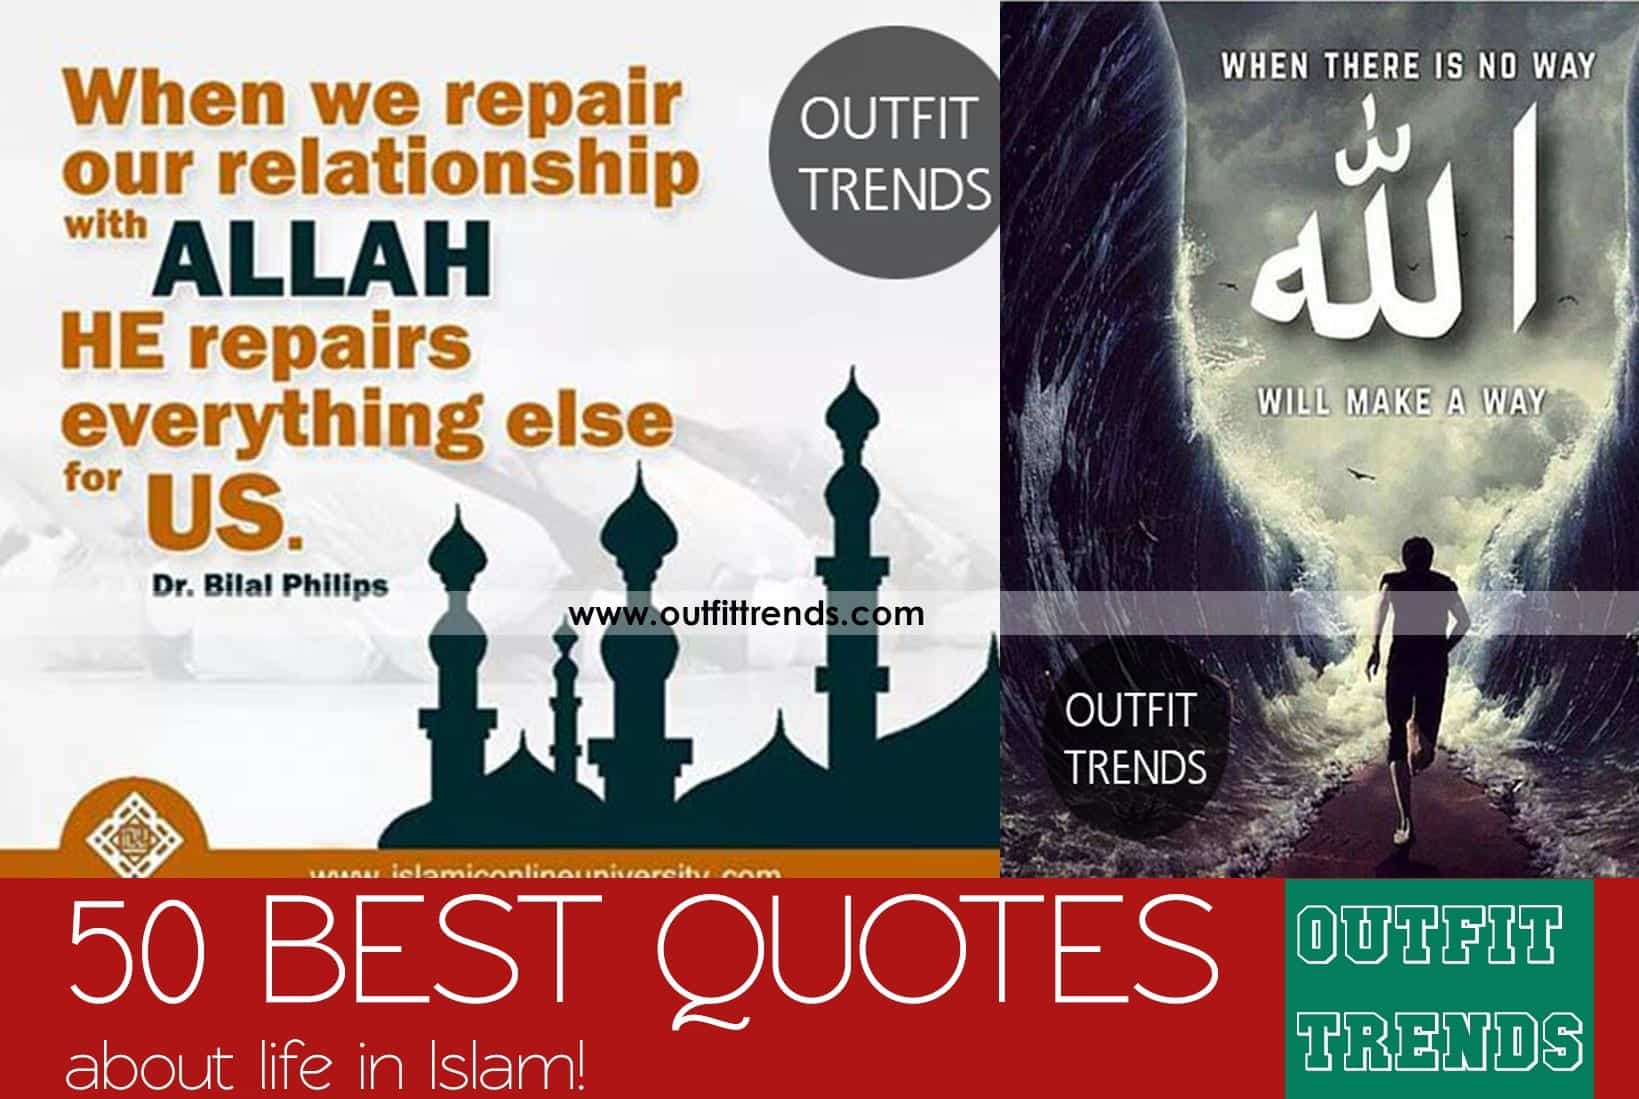 Islamic Quotes About Life-50 Best Quotes which describes life in Islam